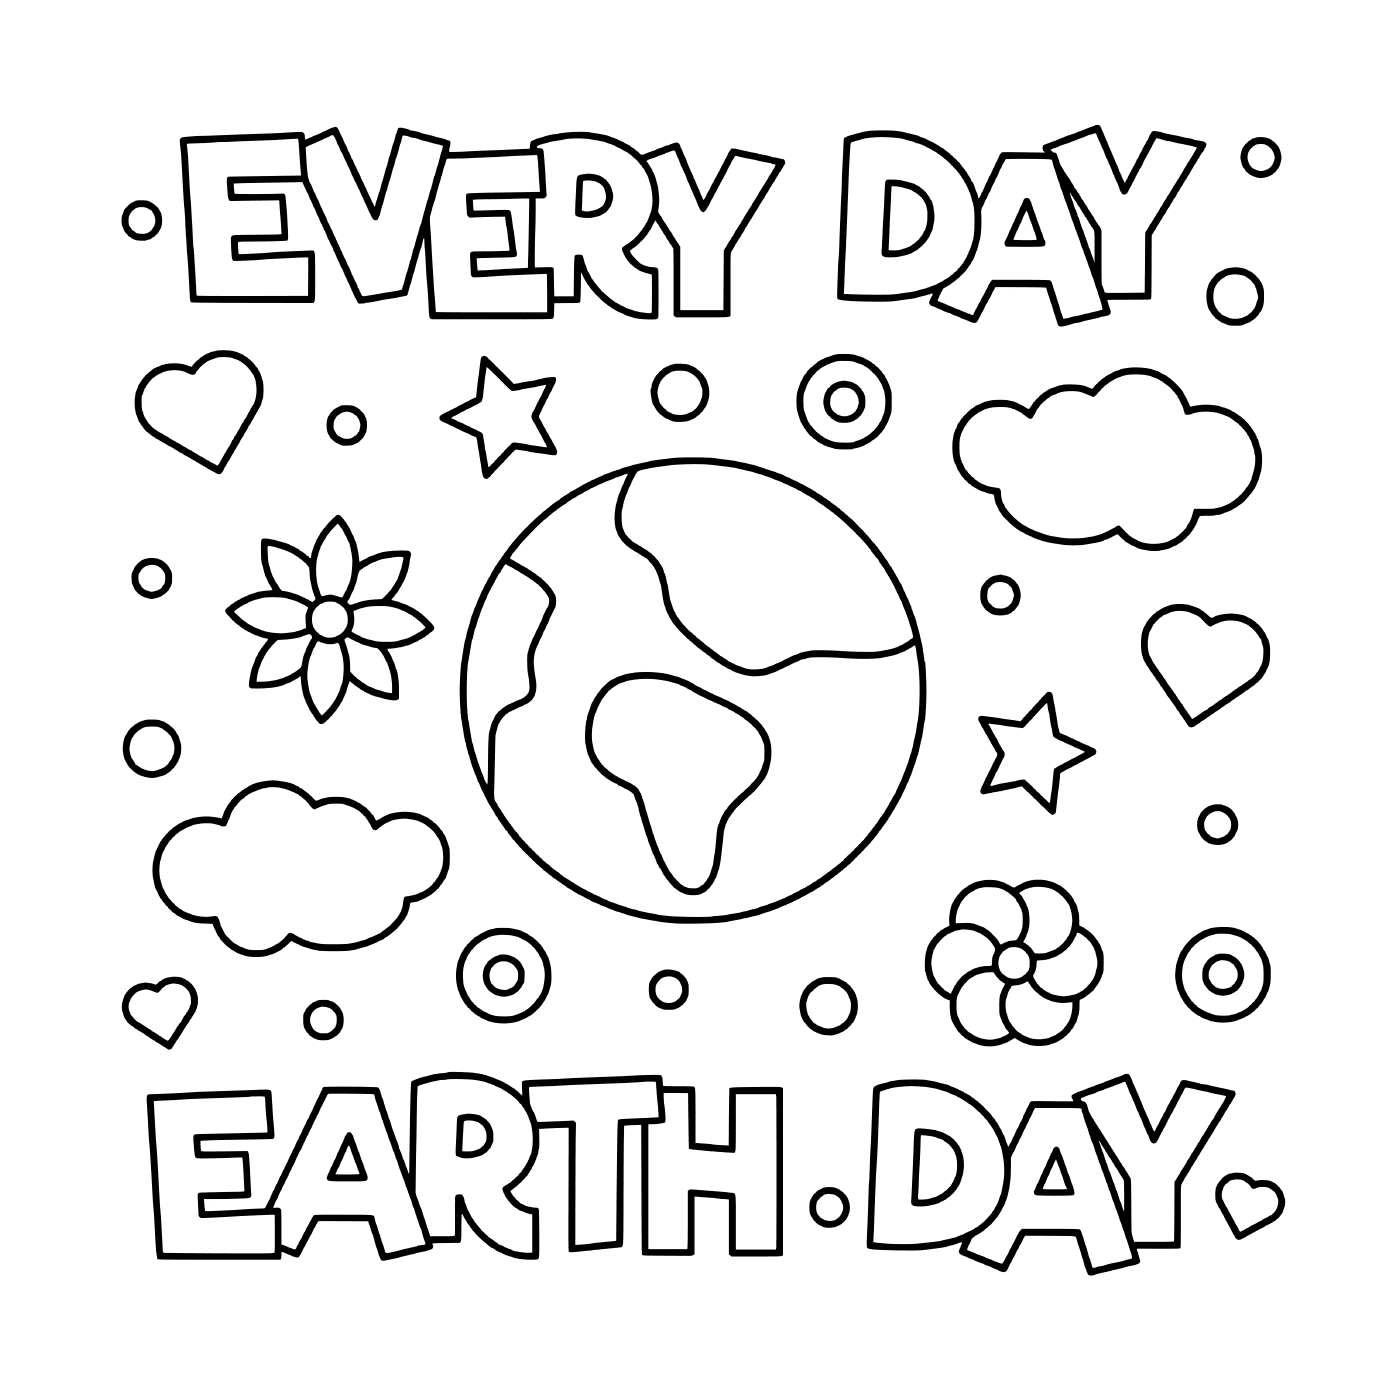  Earth Day: Every day 